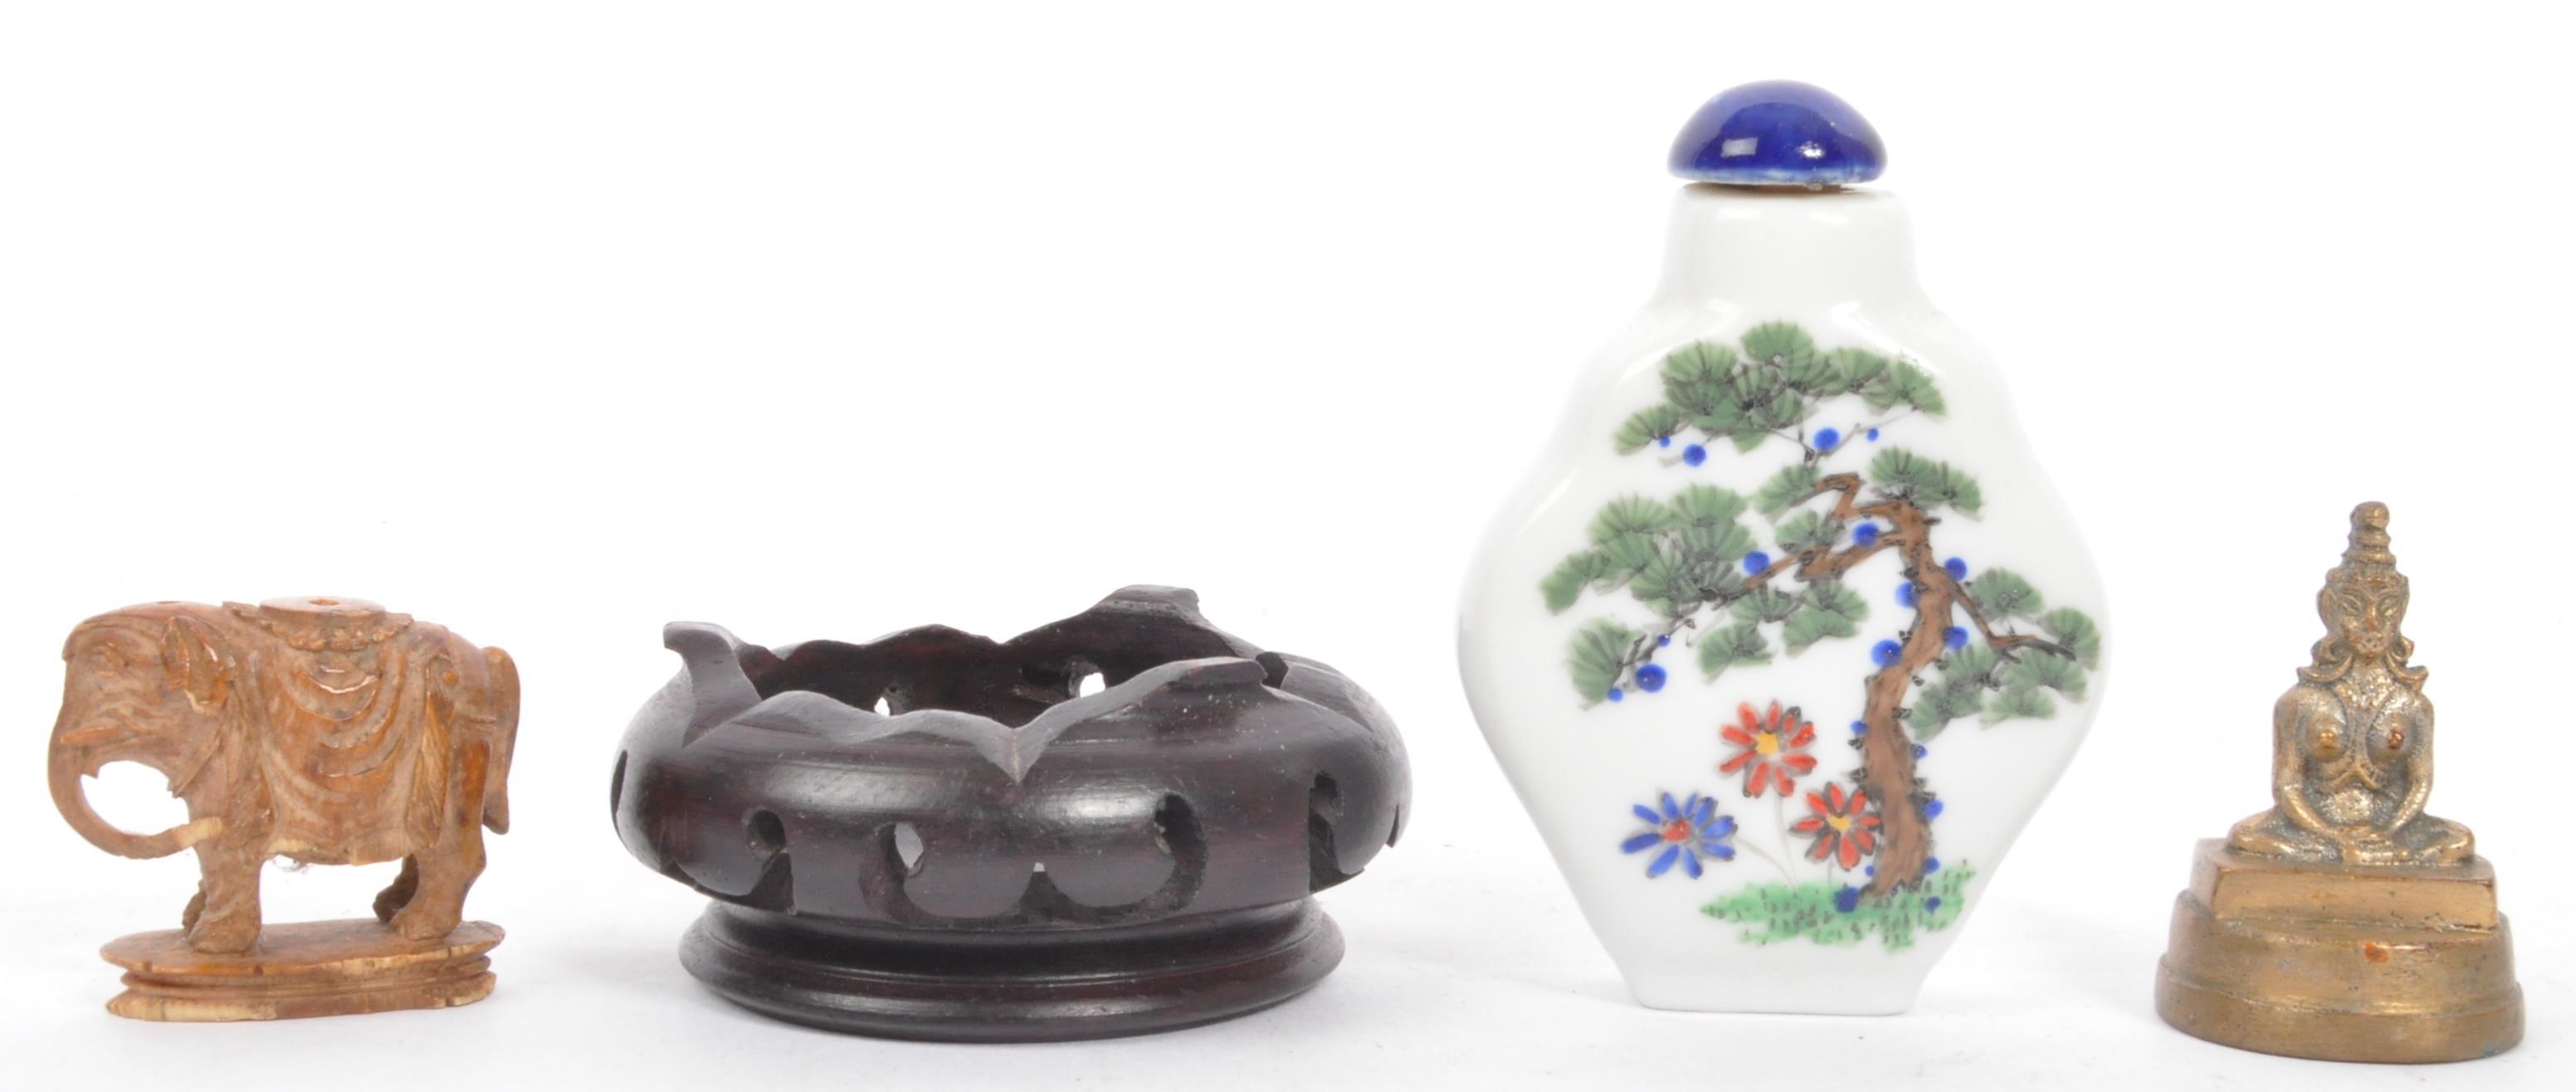 LARGE COLLECTION OF CHINESE PORCELAIN & CERAMIC ITEMS - Image 6 of 7